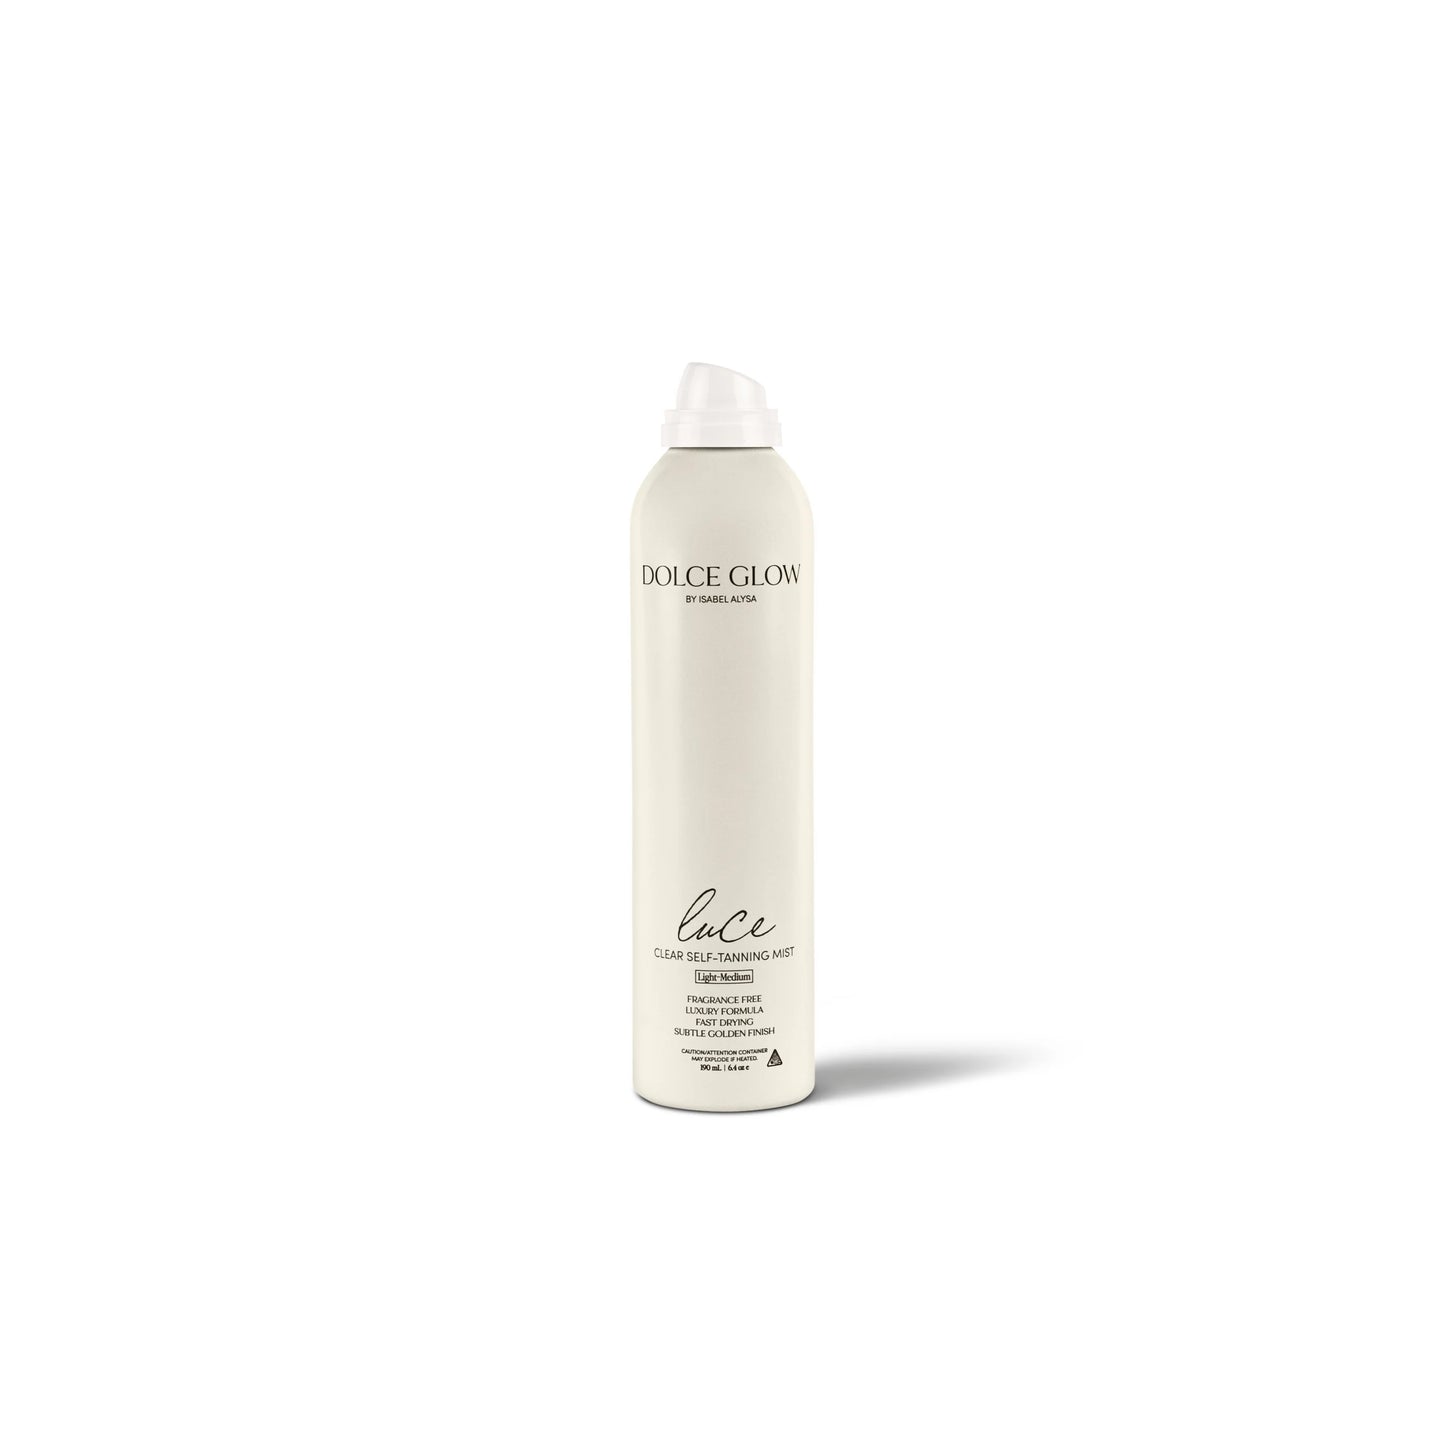 Luce Clear Self-Tanning Mist